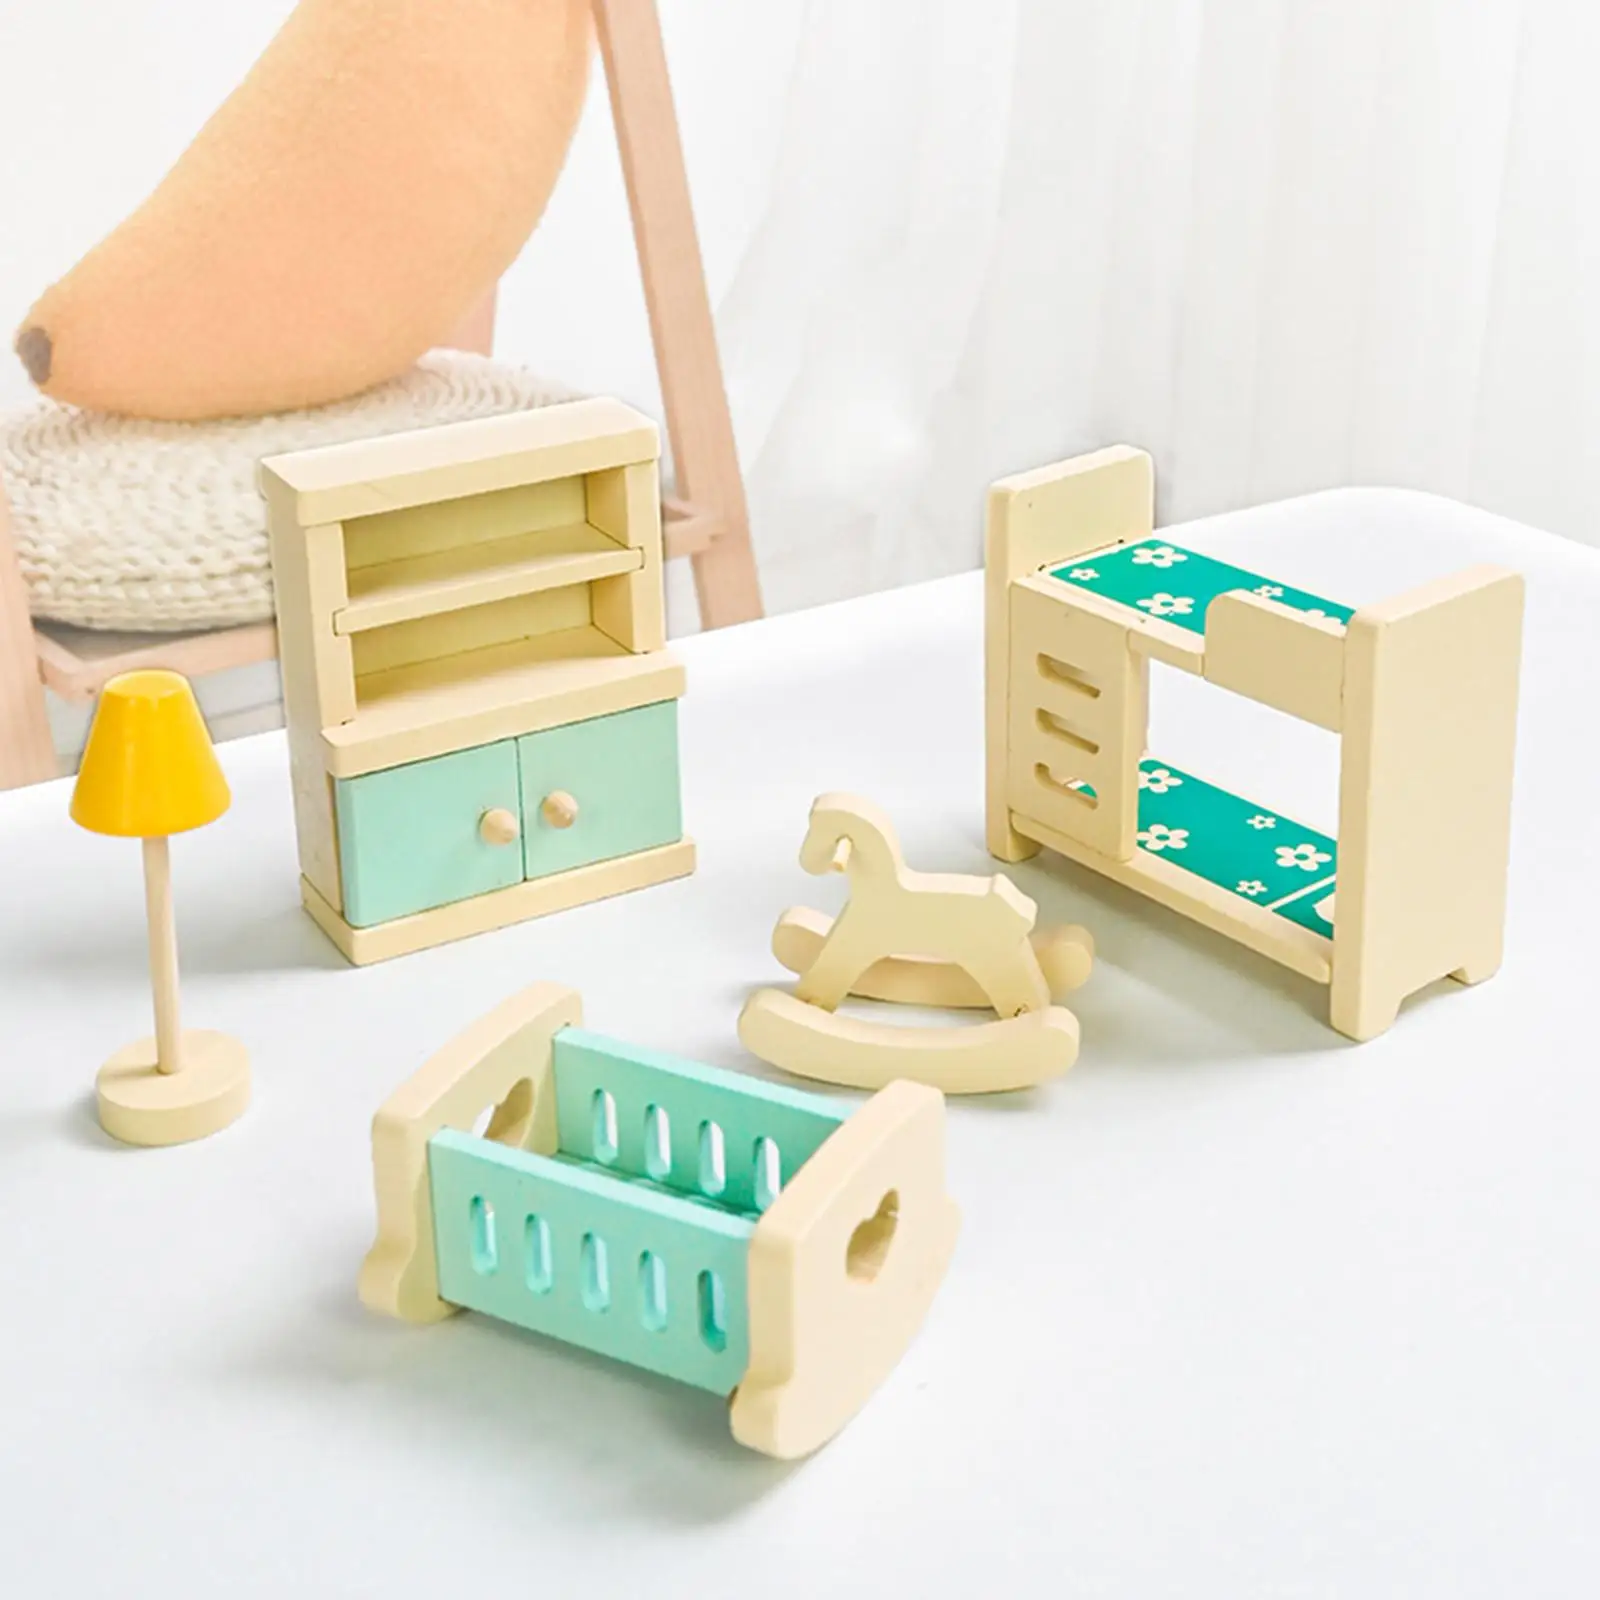 Simulation Miniature Wooden Furniture Toys Doll House Accessories Dollhouse Furniture Set Dollhouse Furniture Playset for Decor